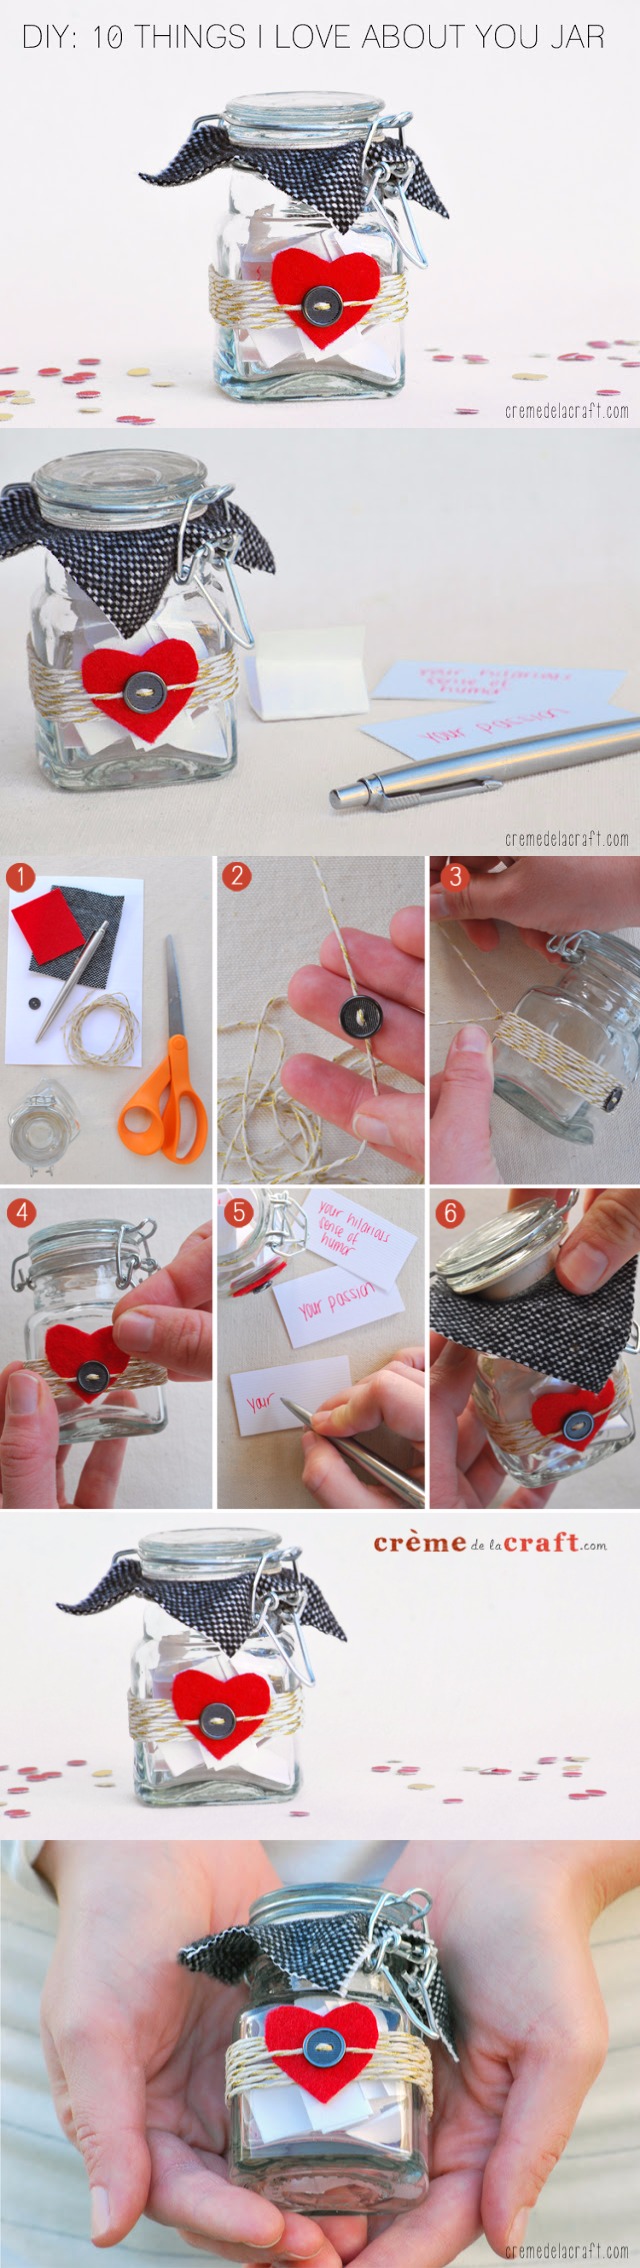 16-diy-10-things-i-love-about-you-jar